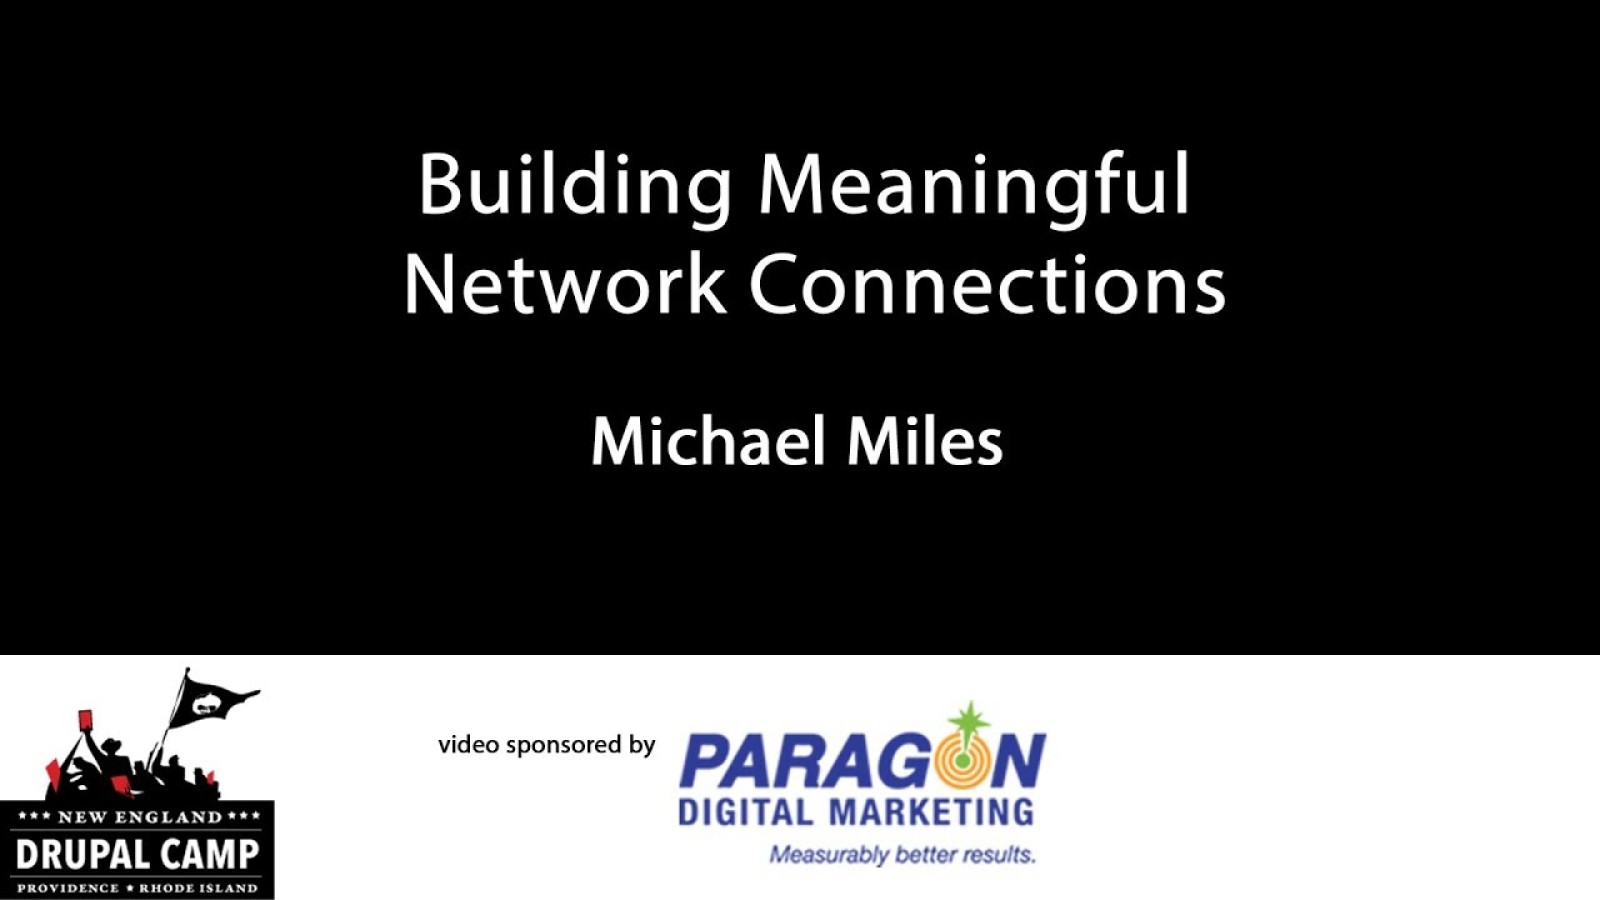 Building Meaningful Network Connections